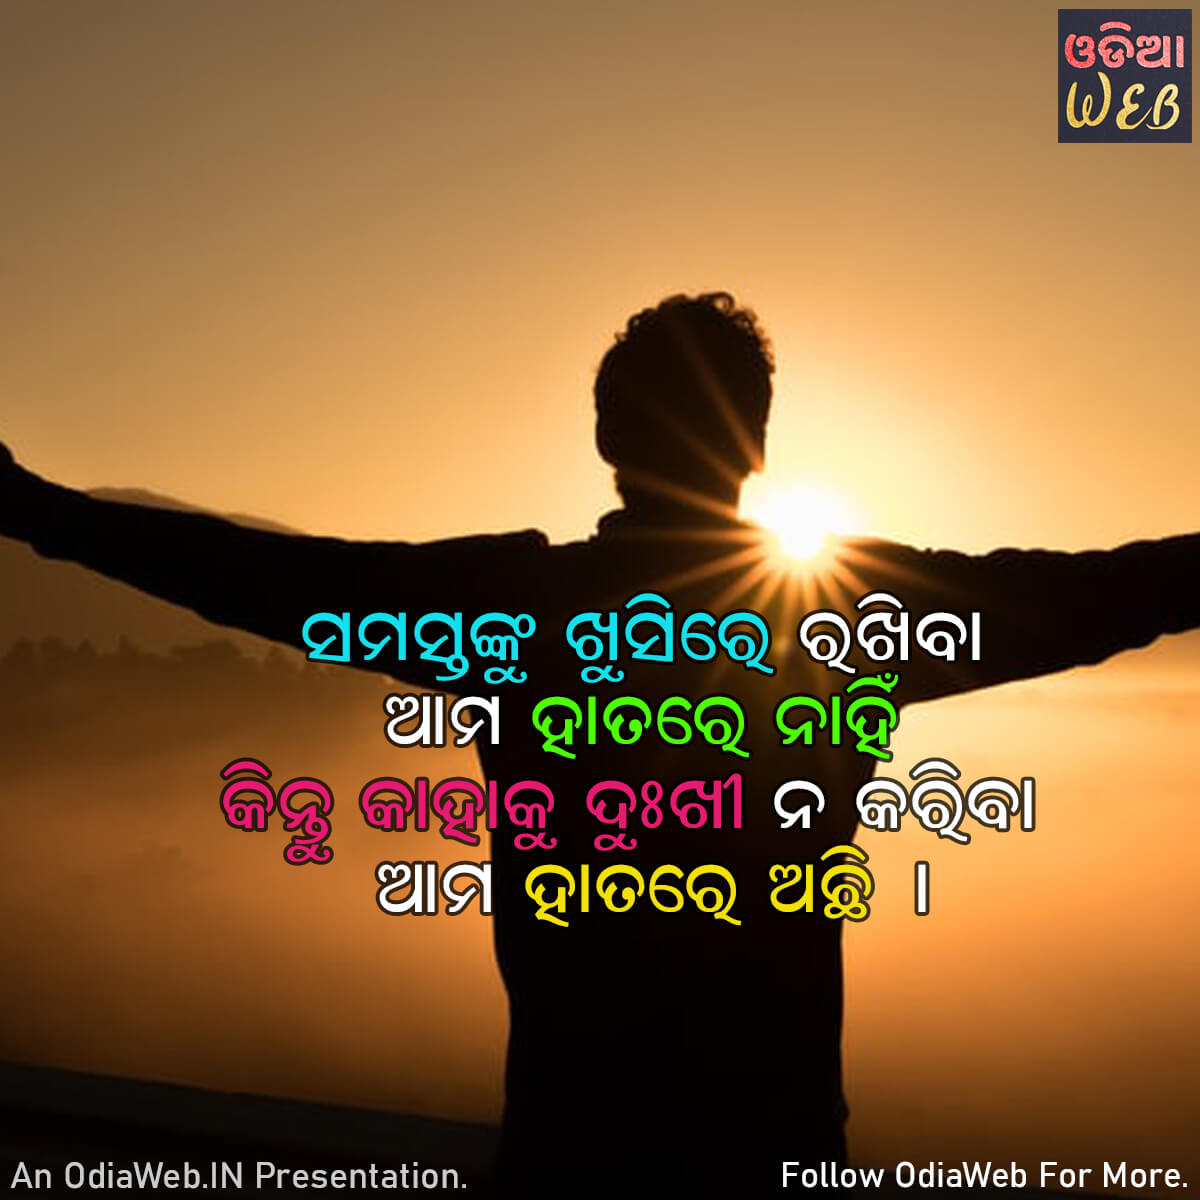 Odia Relationship Quotes2